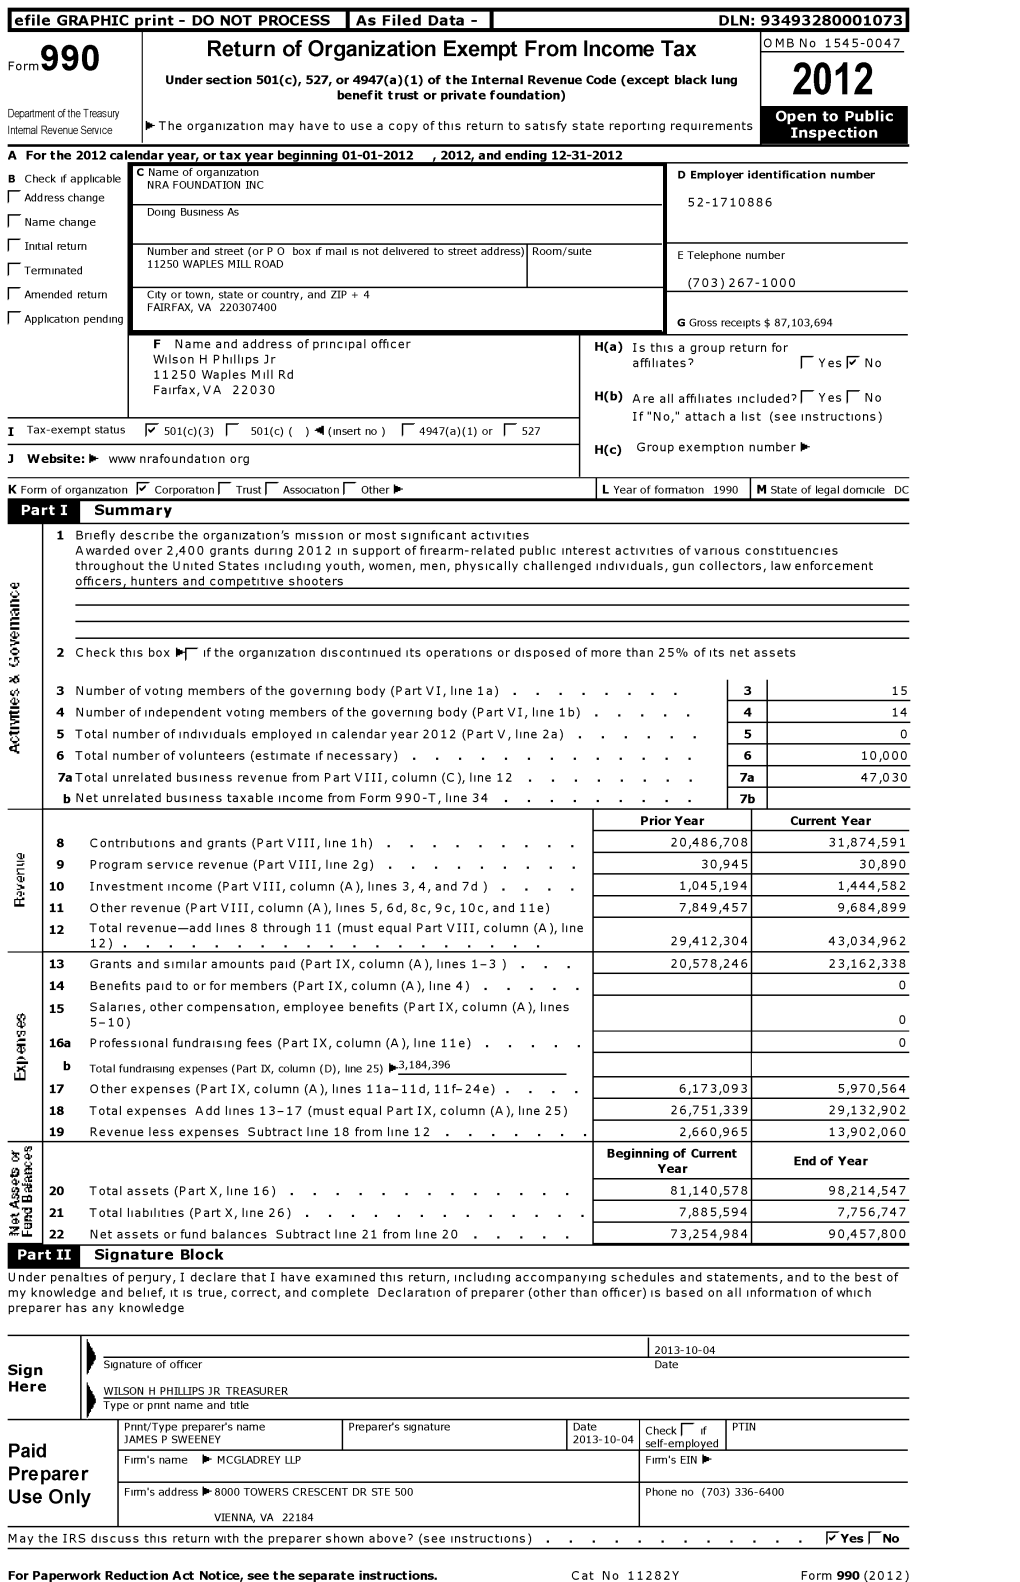 Form 990 for NRA FOUNDATION